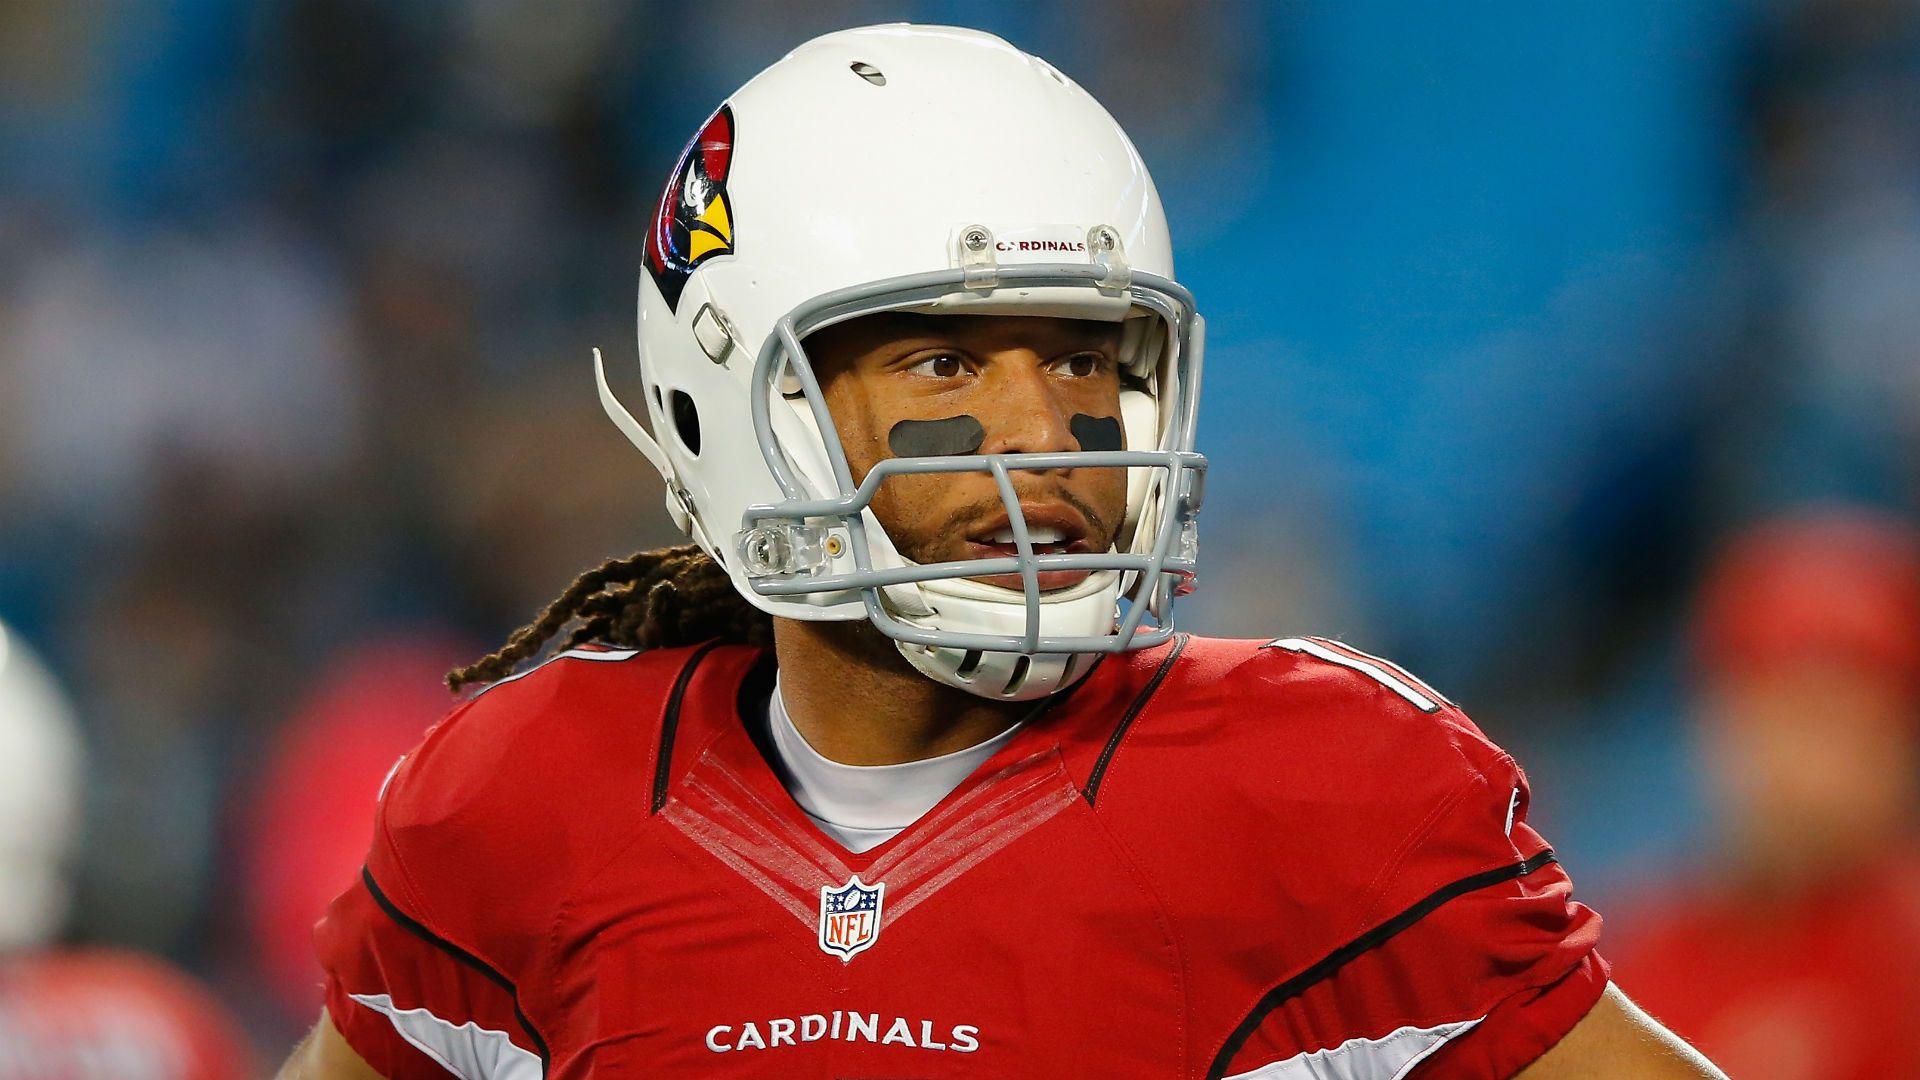 Larry Fitzgerald Wallpapers - Wallpaper Cave